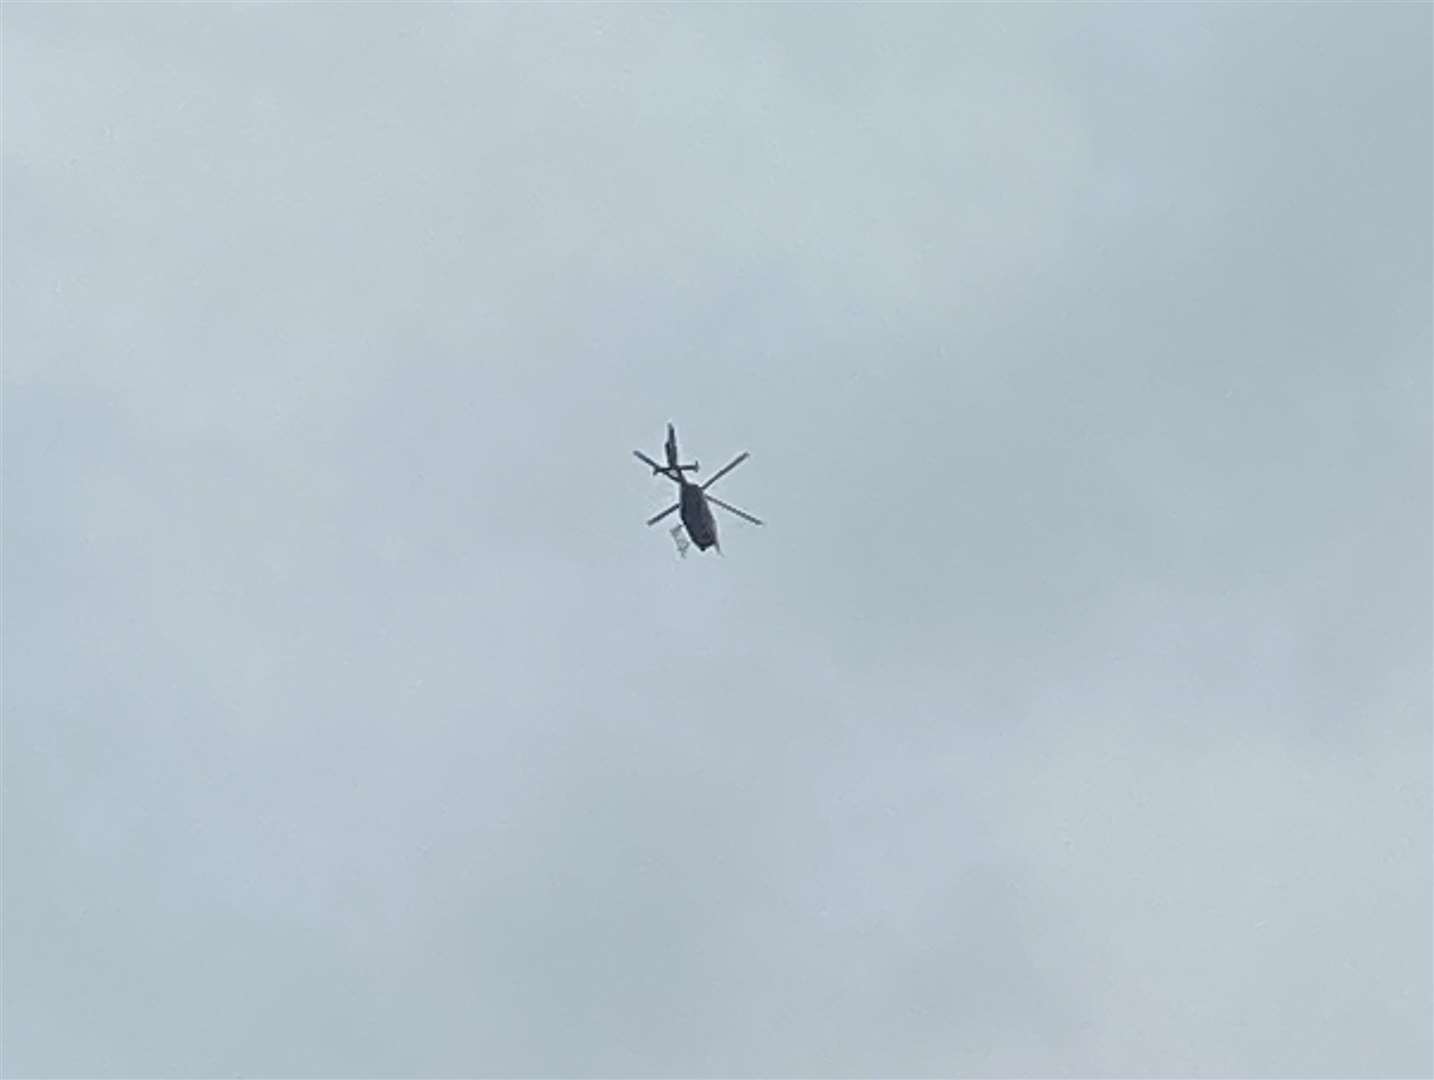 A helicopter was spotted circling over Faversham this afternoon